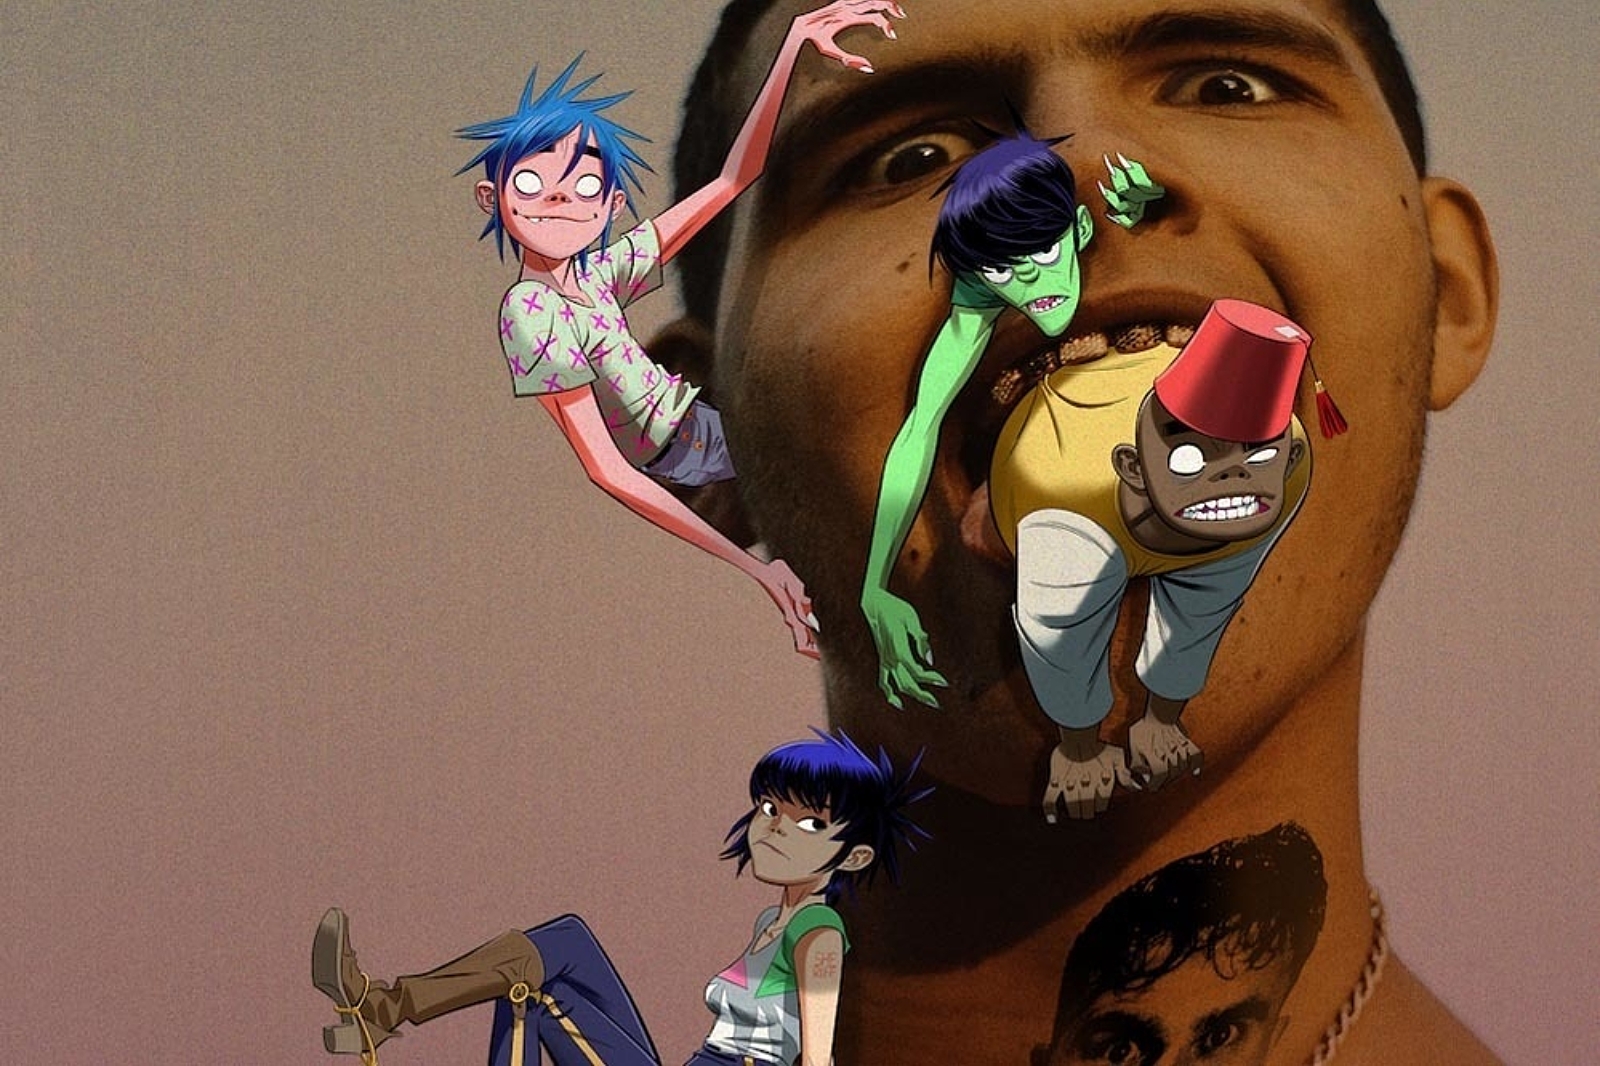 Gorillaz unveil 'Momentary Bliss' video, featuring slowthai and Slaves